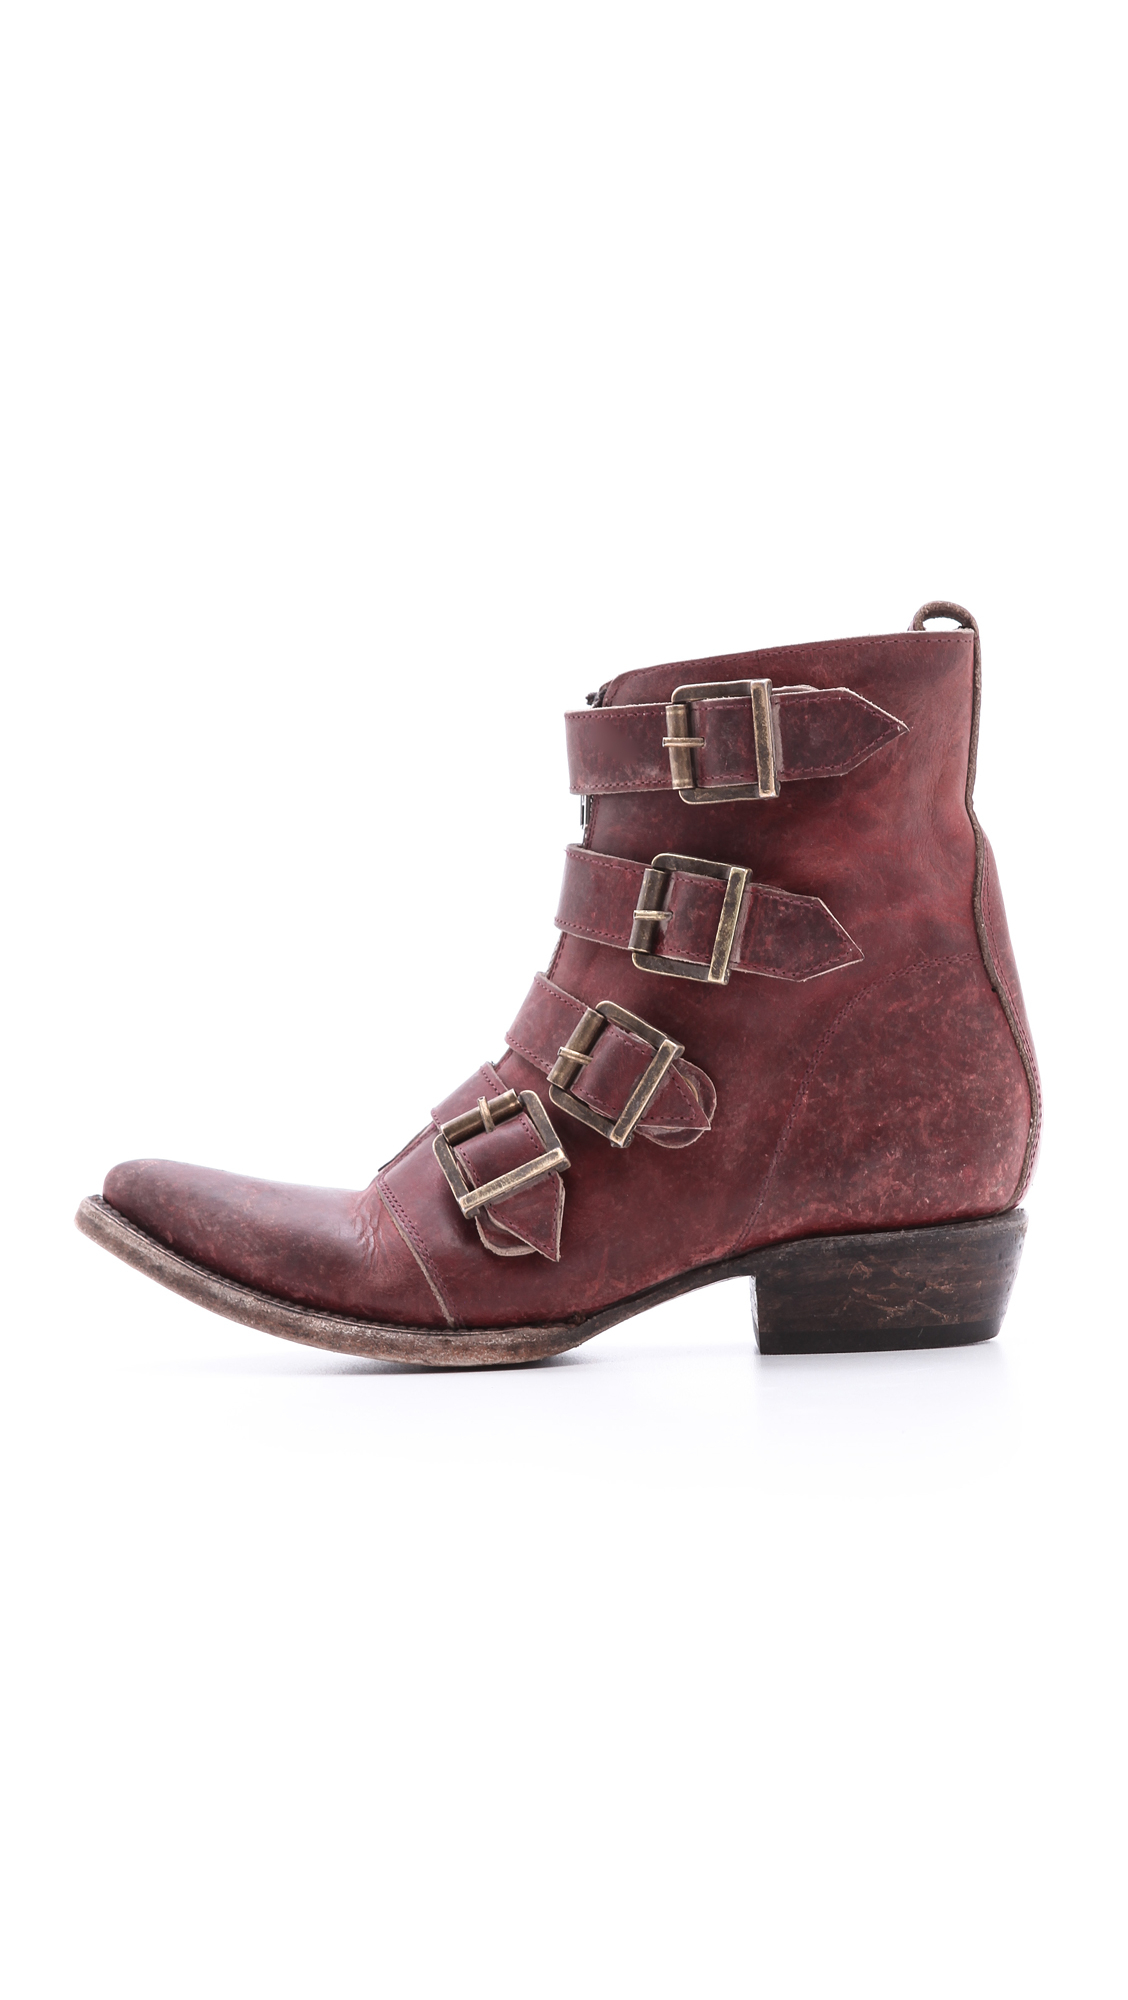 Lyst - Freebird By Steven Skelter Boots Red in Red